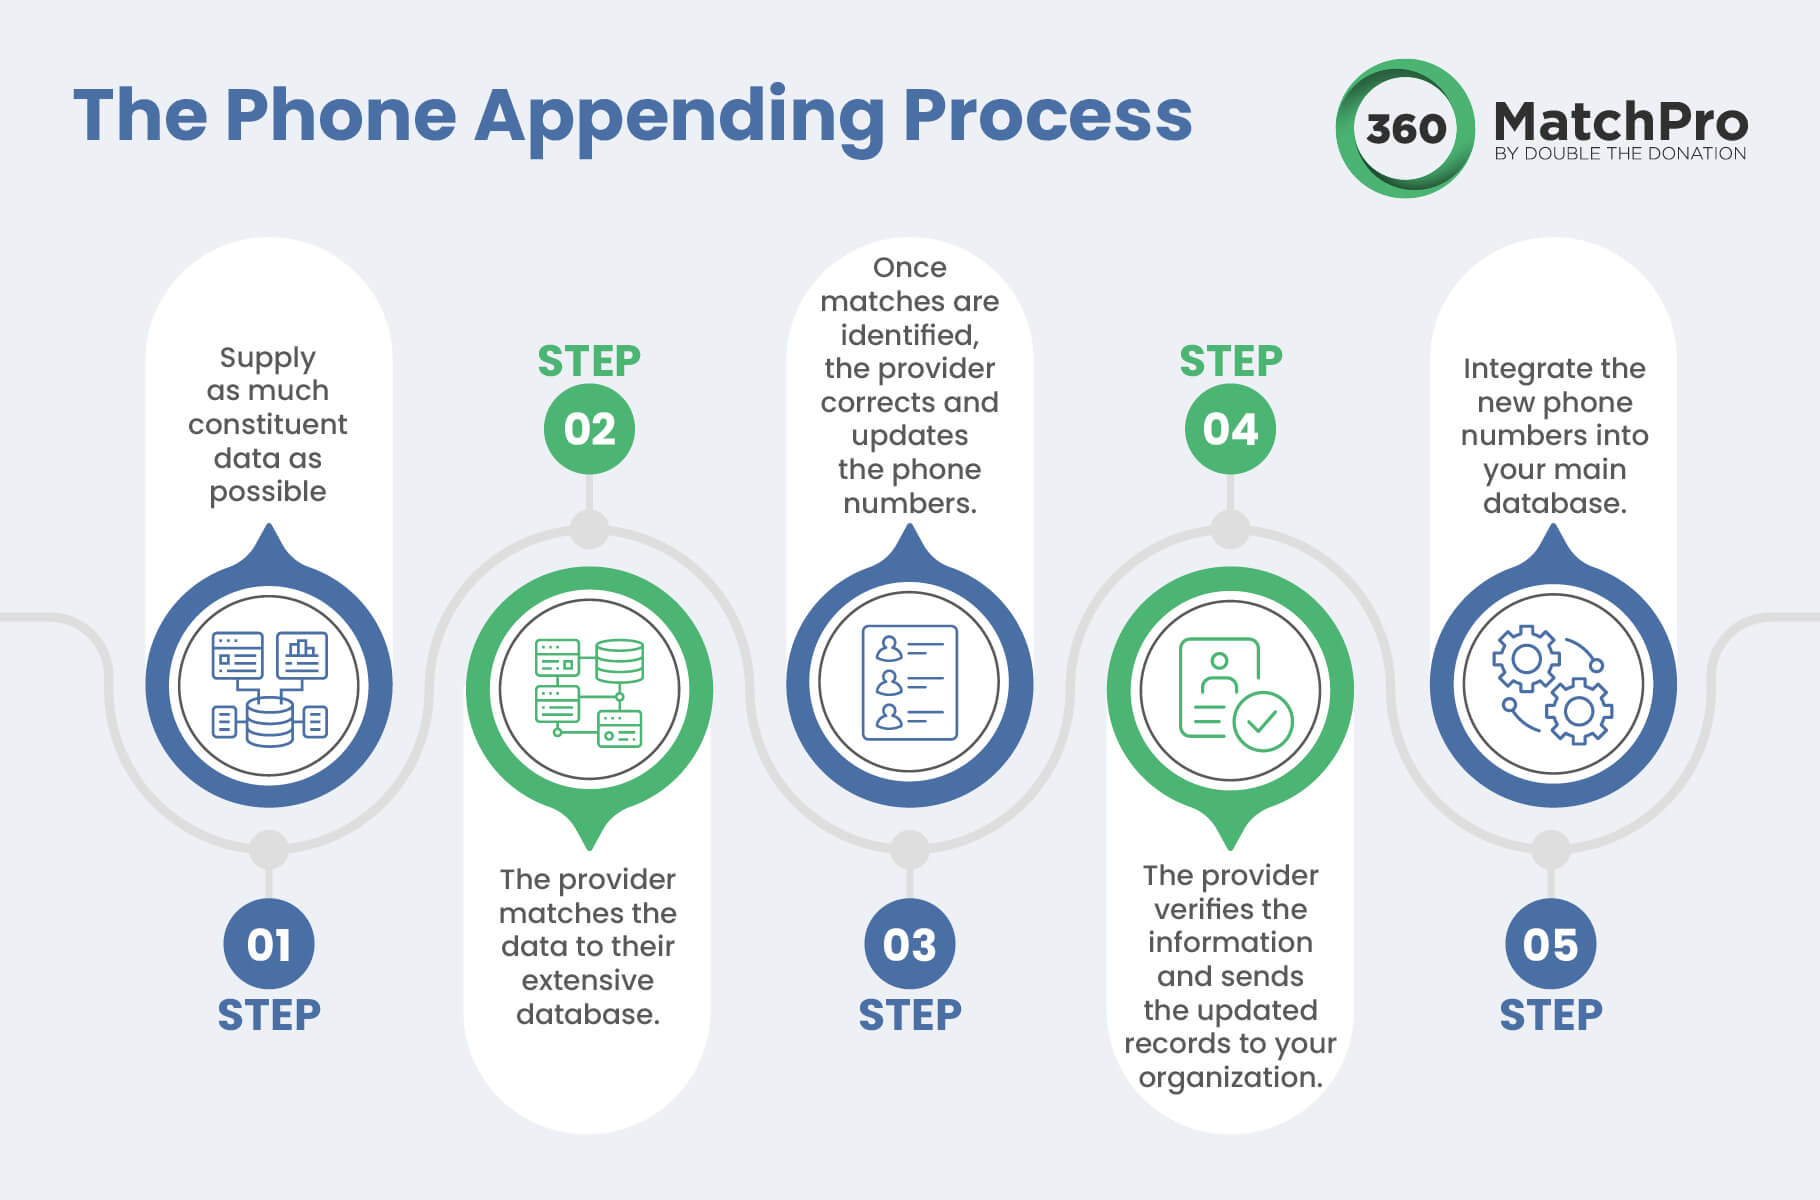 The steps of the phone appending process, explained below